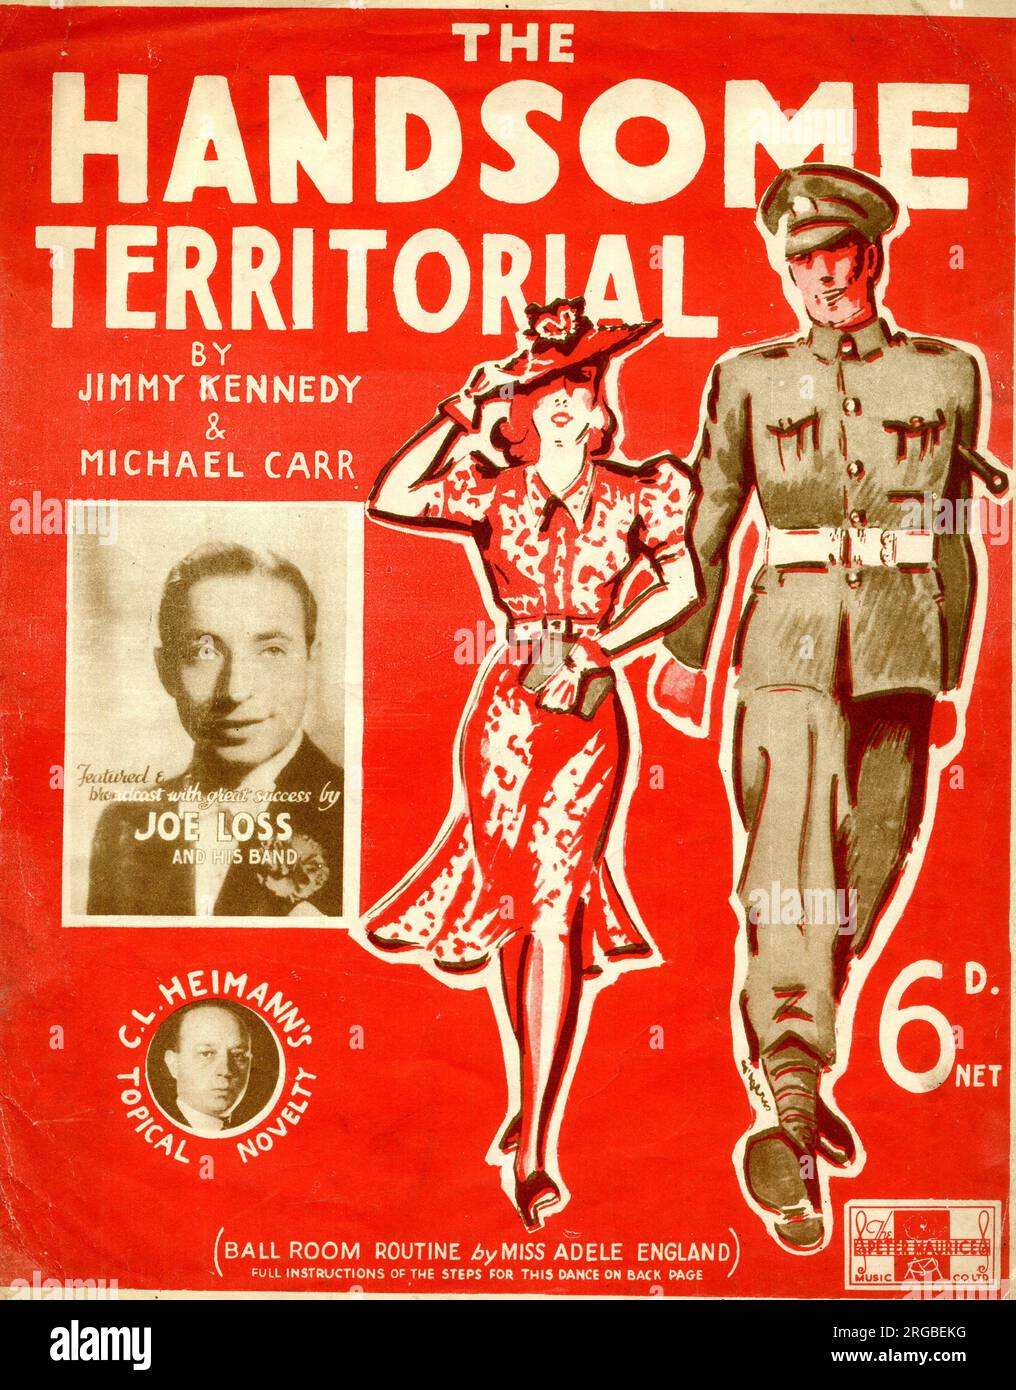 Music cover, The Handsome Territorial, recorded by Joe Loss and His Band, WW2. Stock Photo